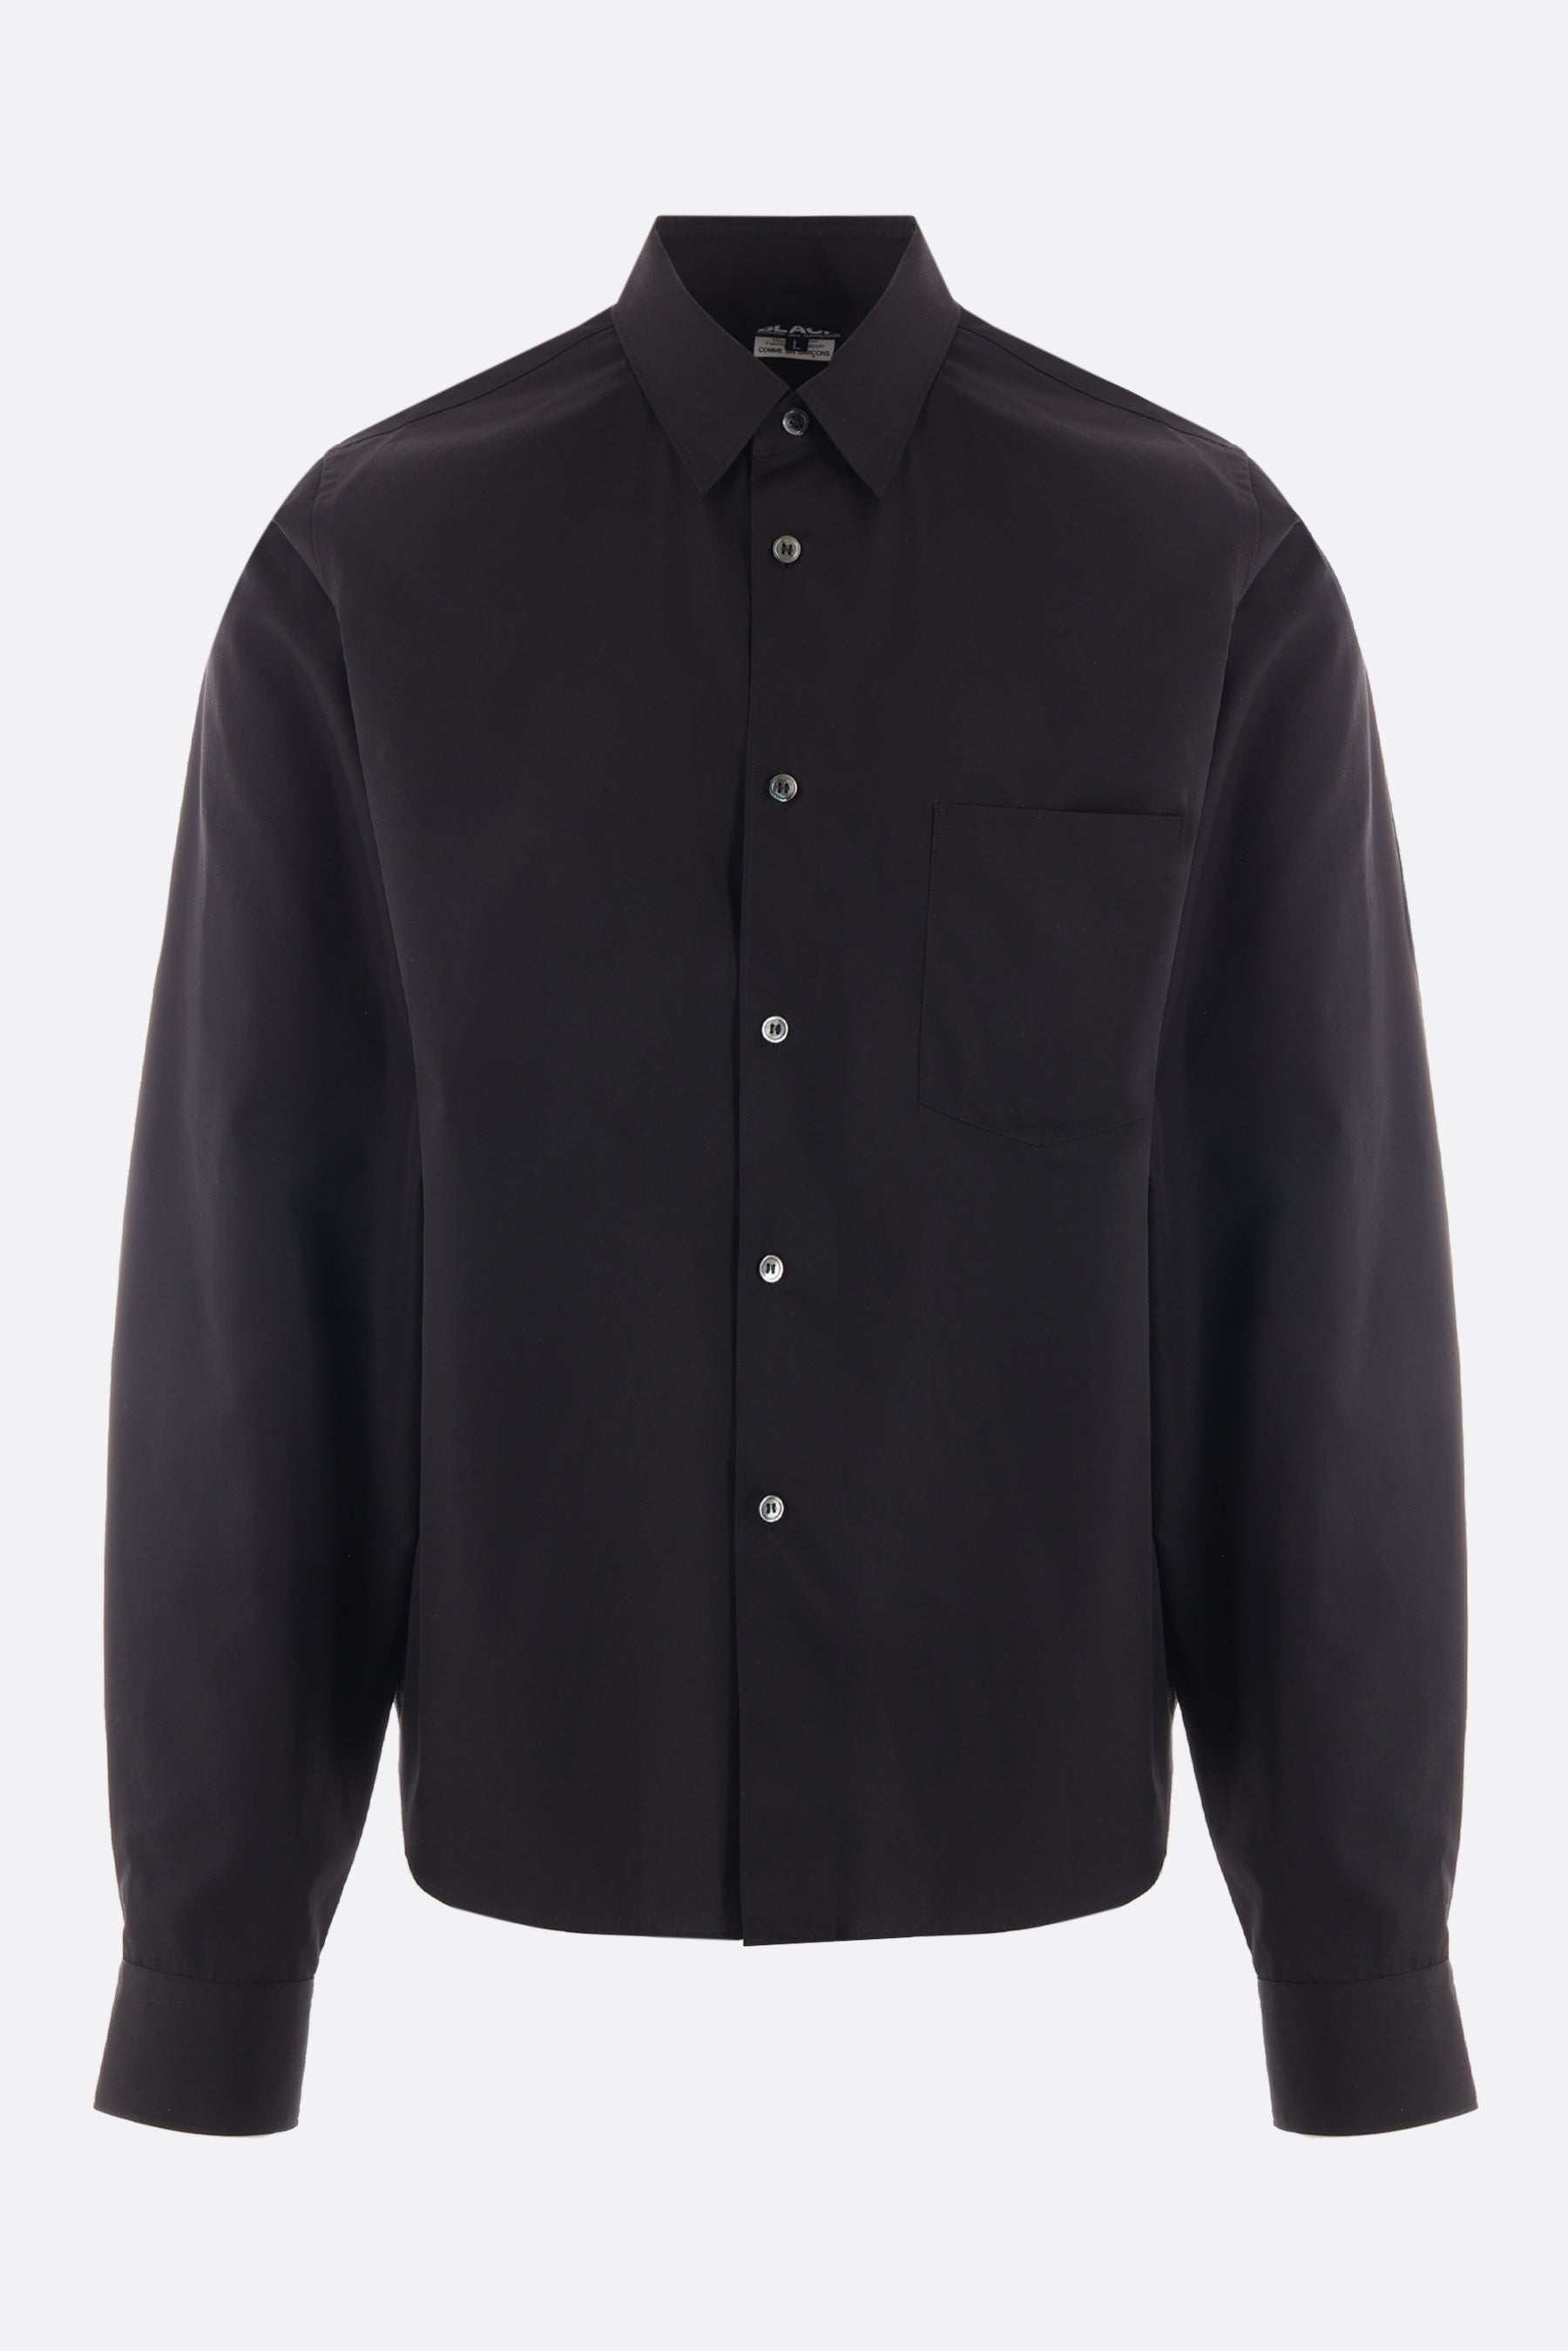 poplin shirt with cut-out details